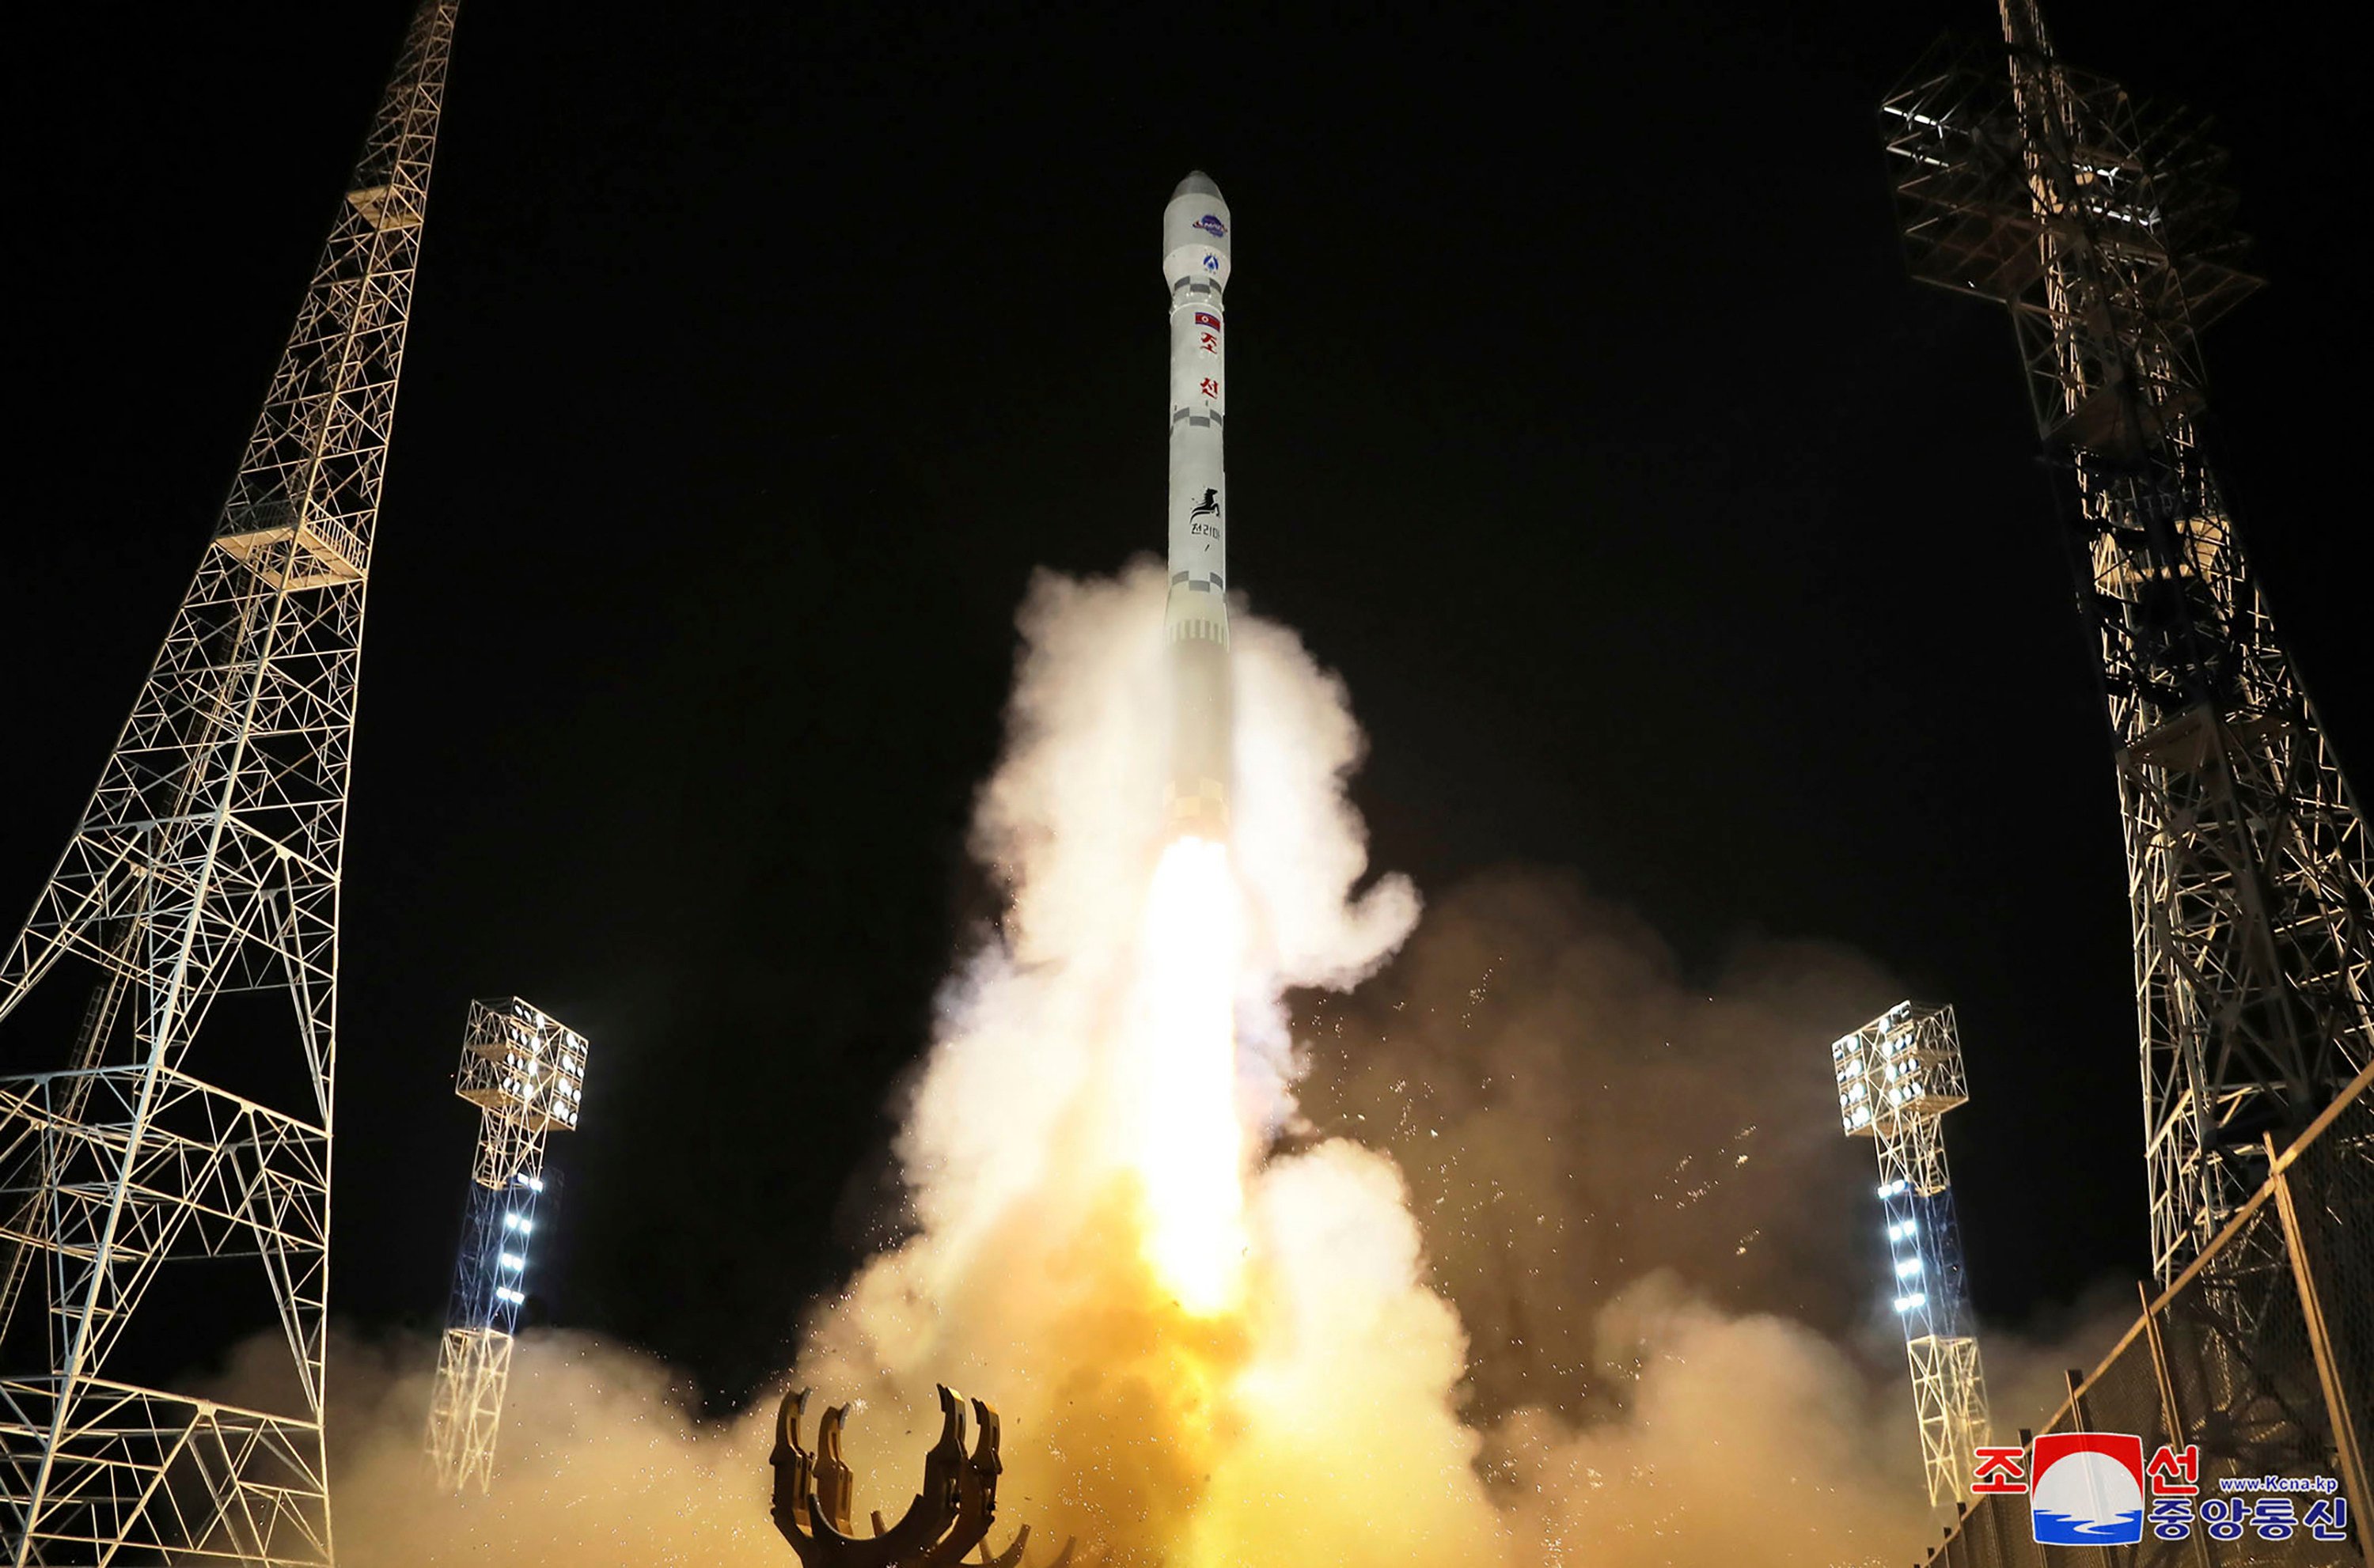 A photo released by North Korean state media in November shows the launch of Malligyong-1, the country’s first military spy satellite. Photo: Korean Central News Agency/Korea News Service via AP